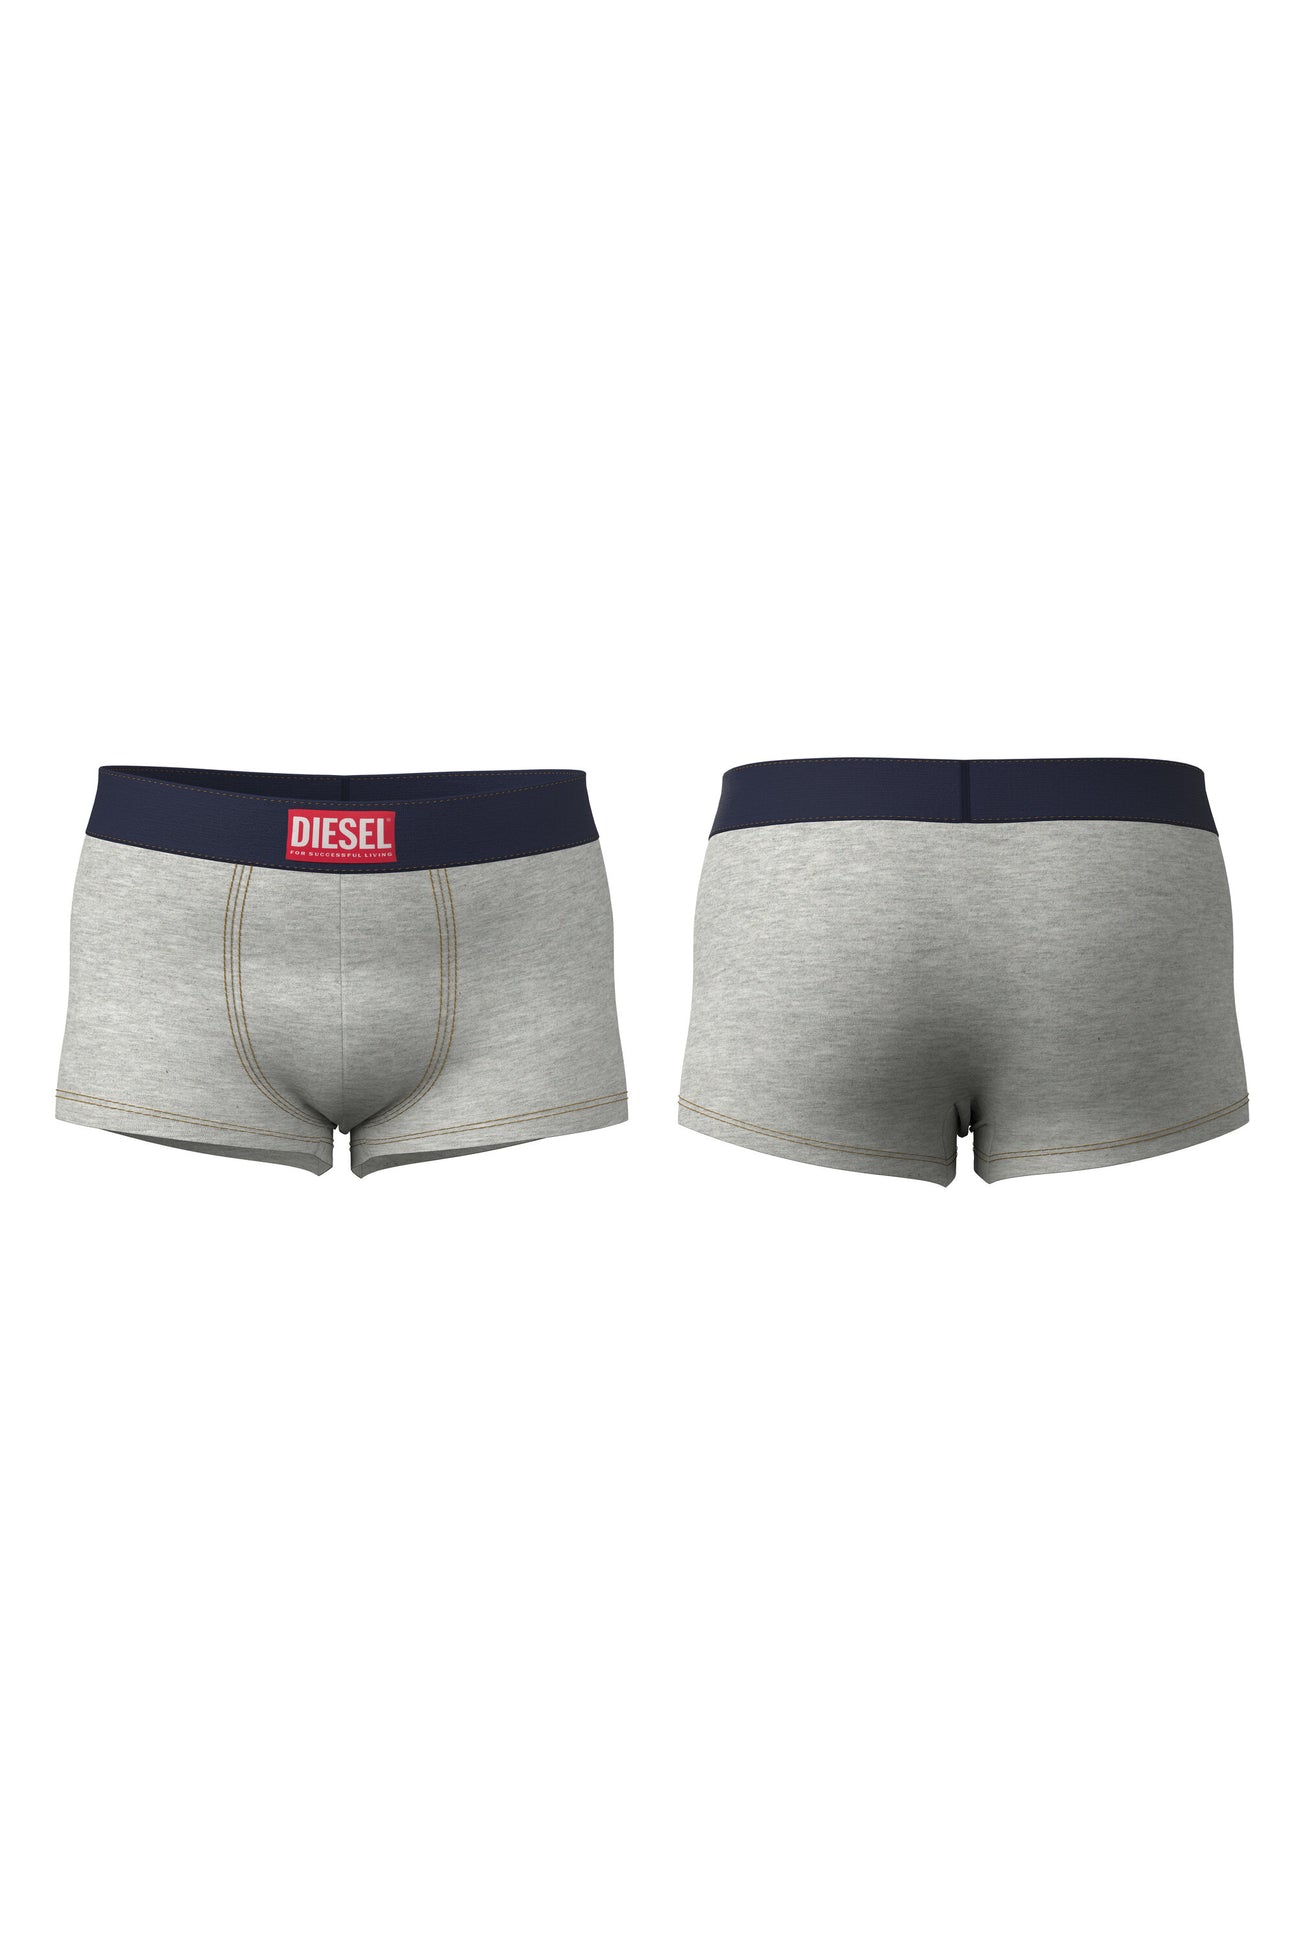 Set 2 boxer shorts with contrasting Diesel logo Set 2 boxer shorts with contrasting Diesel logo